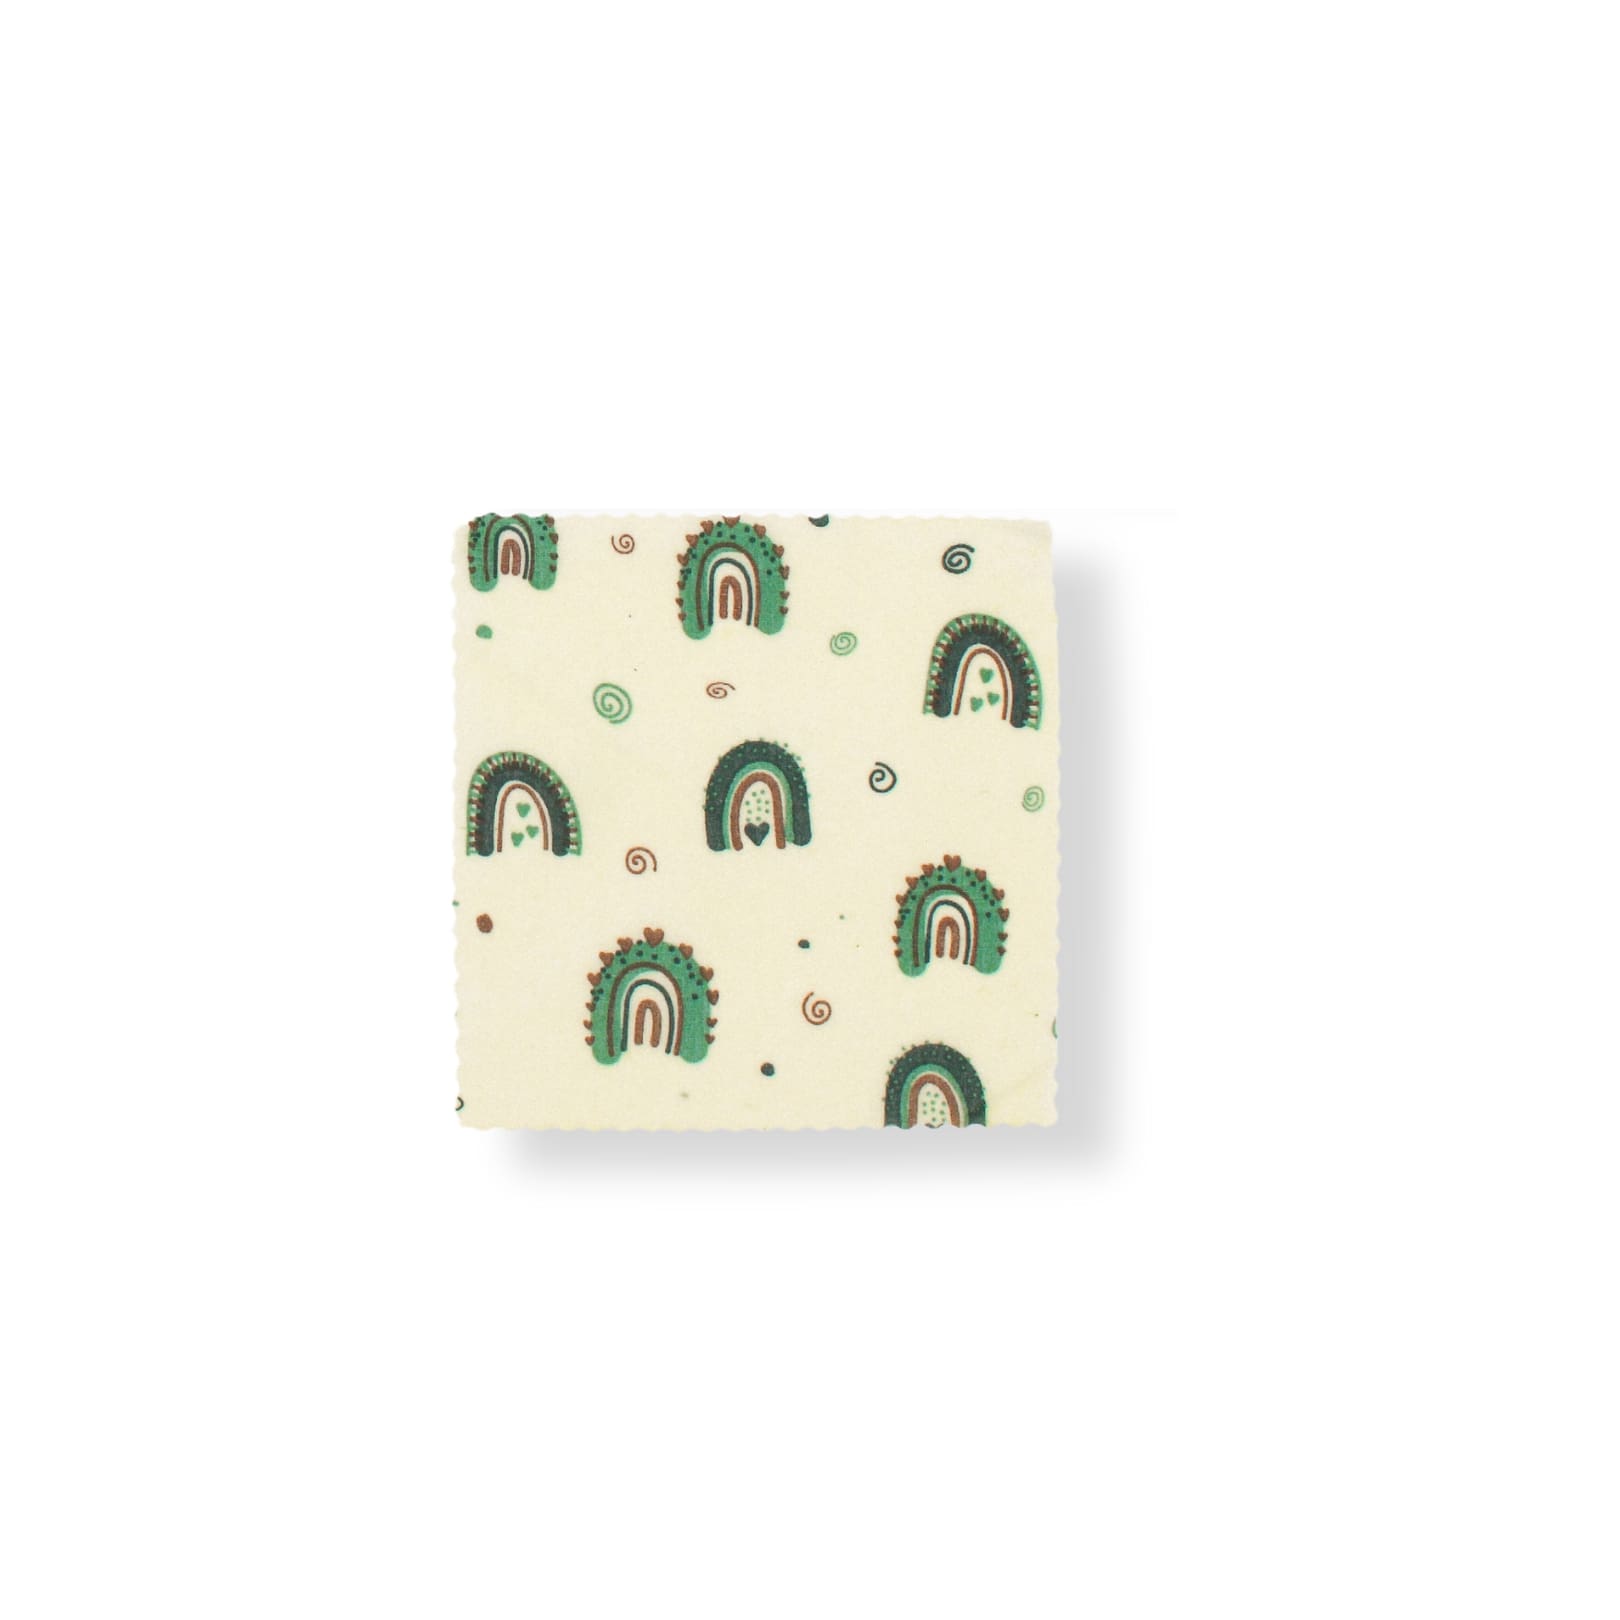 Beeswax Food Wraps - Single Small - The Plastic Free Co.